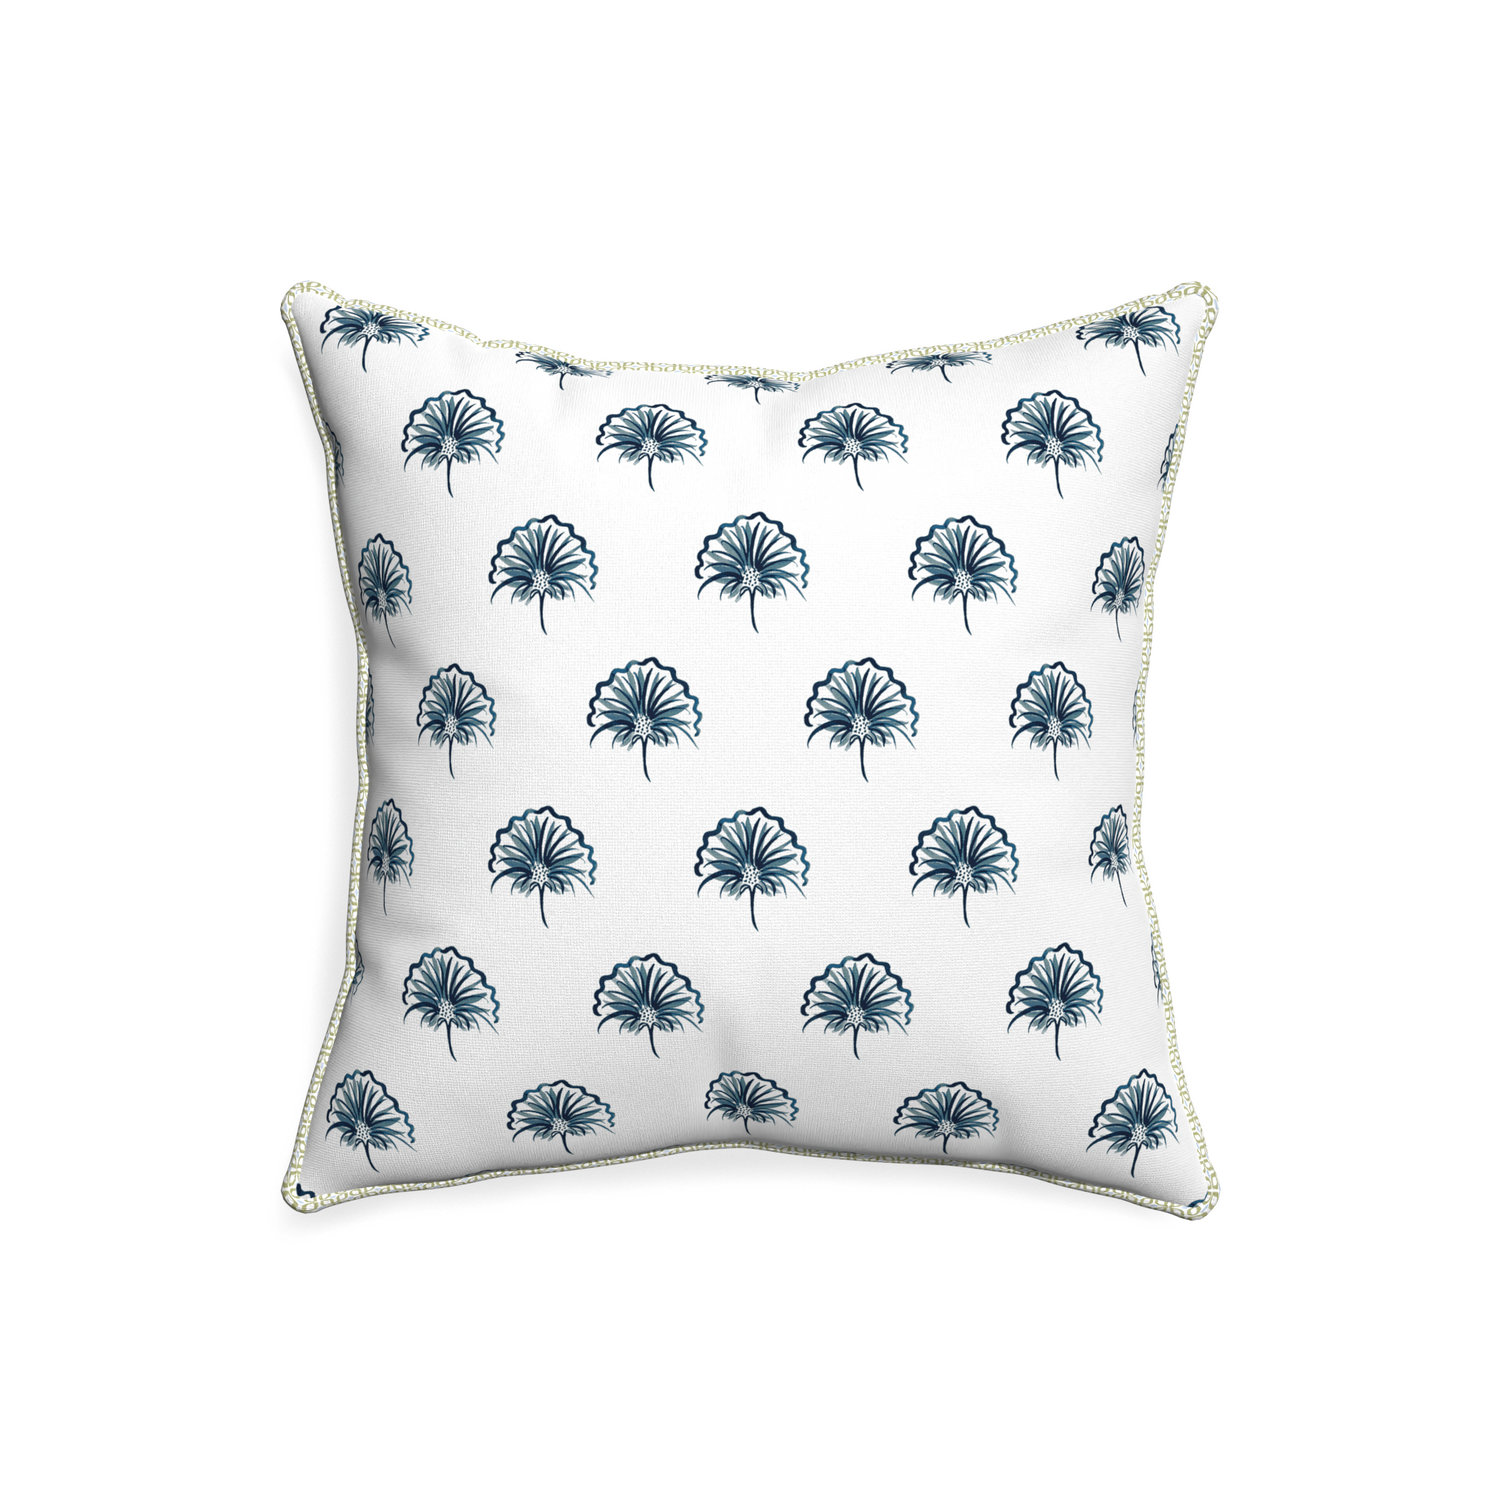 20-square penelope midnight custom pillow with l piping on white background